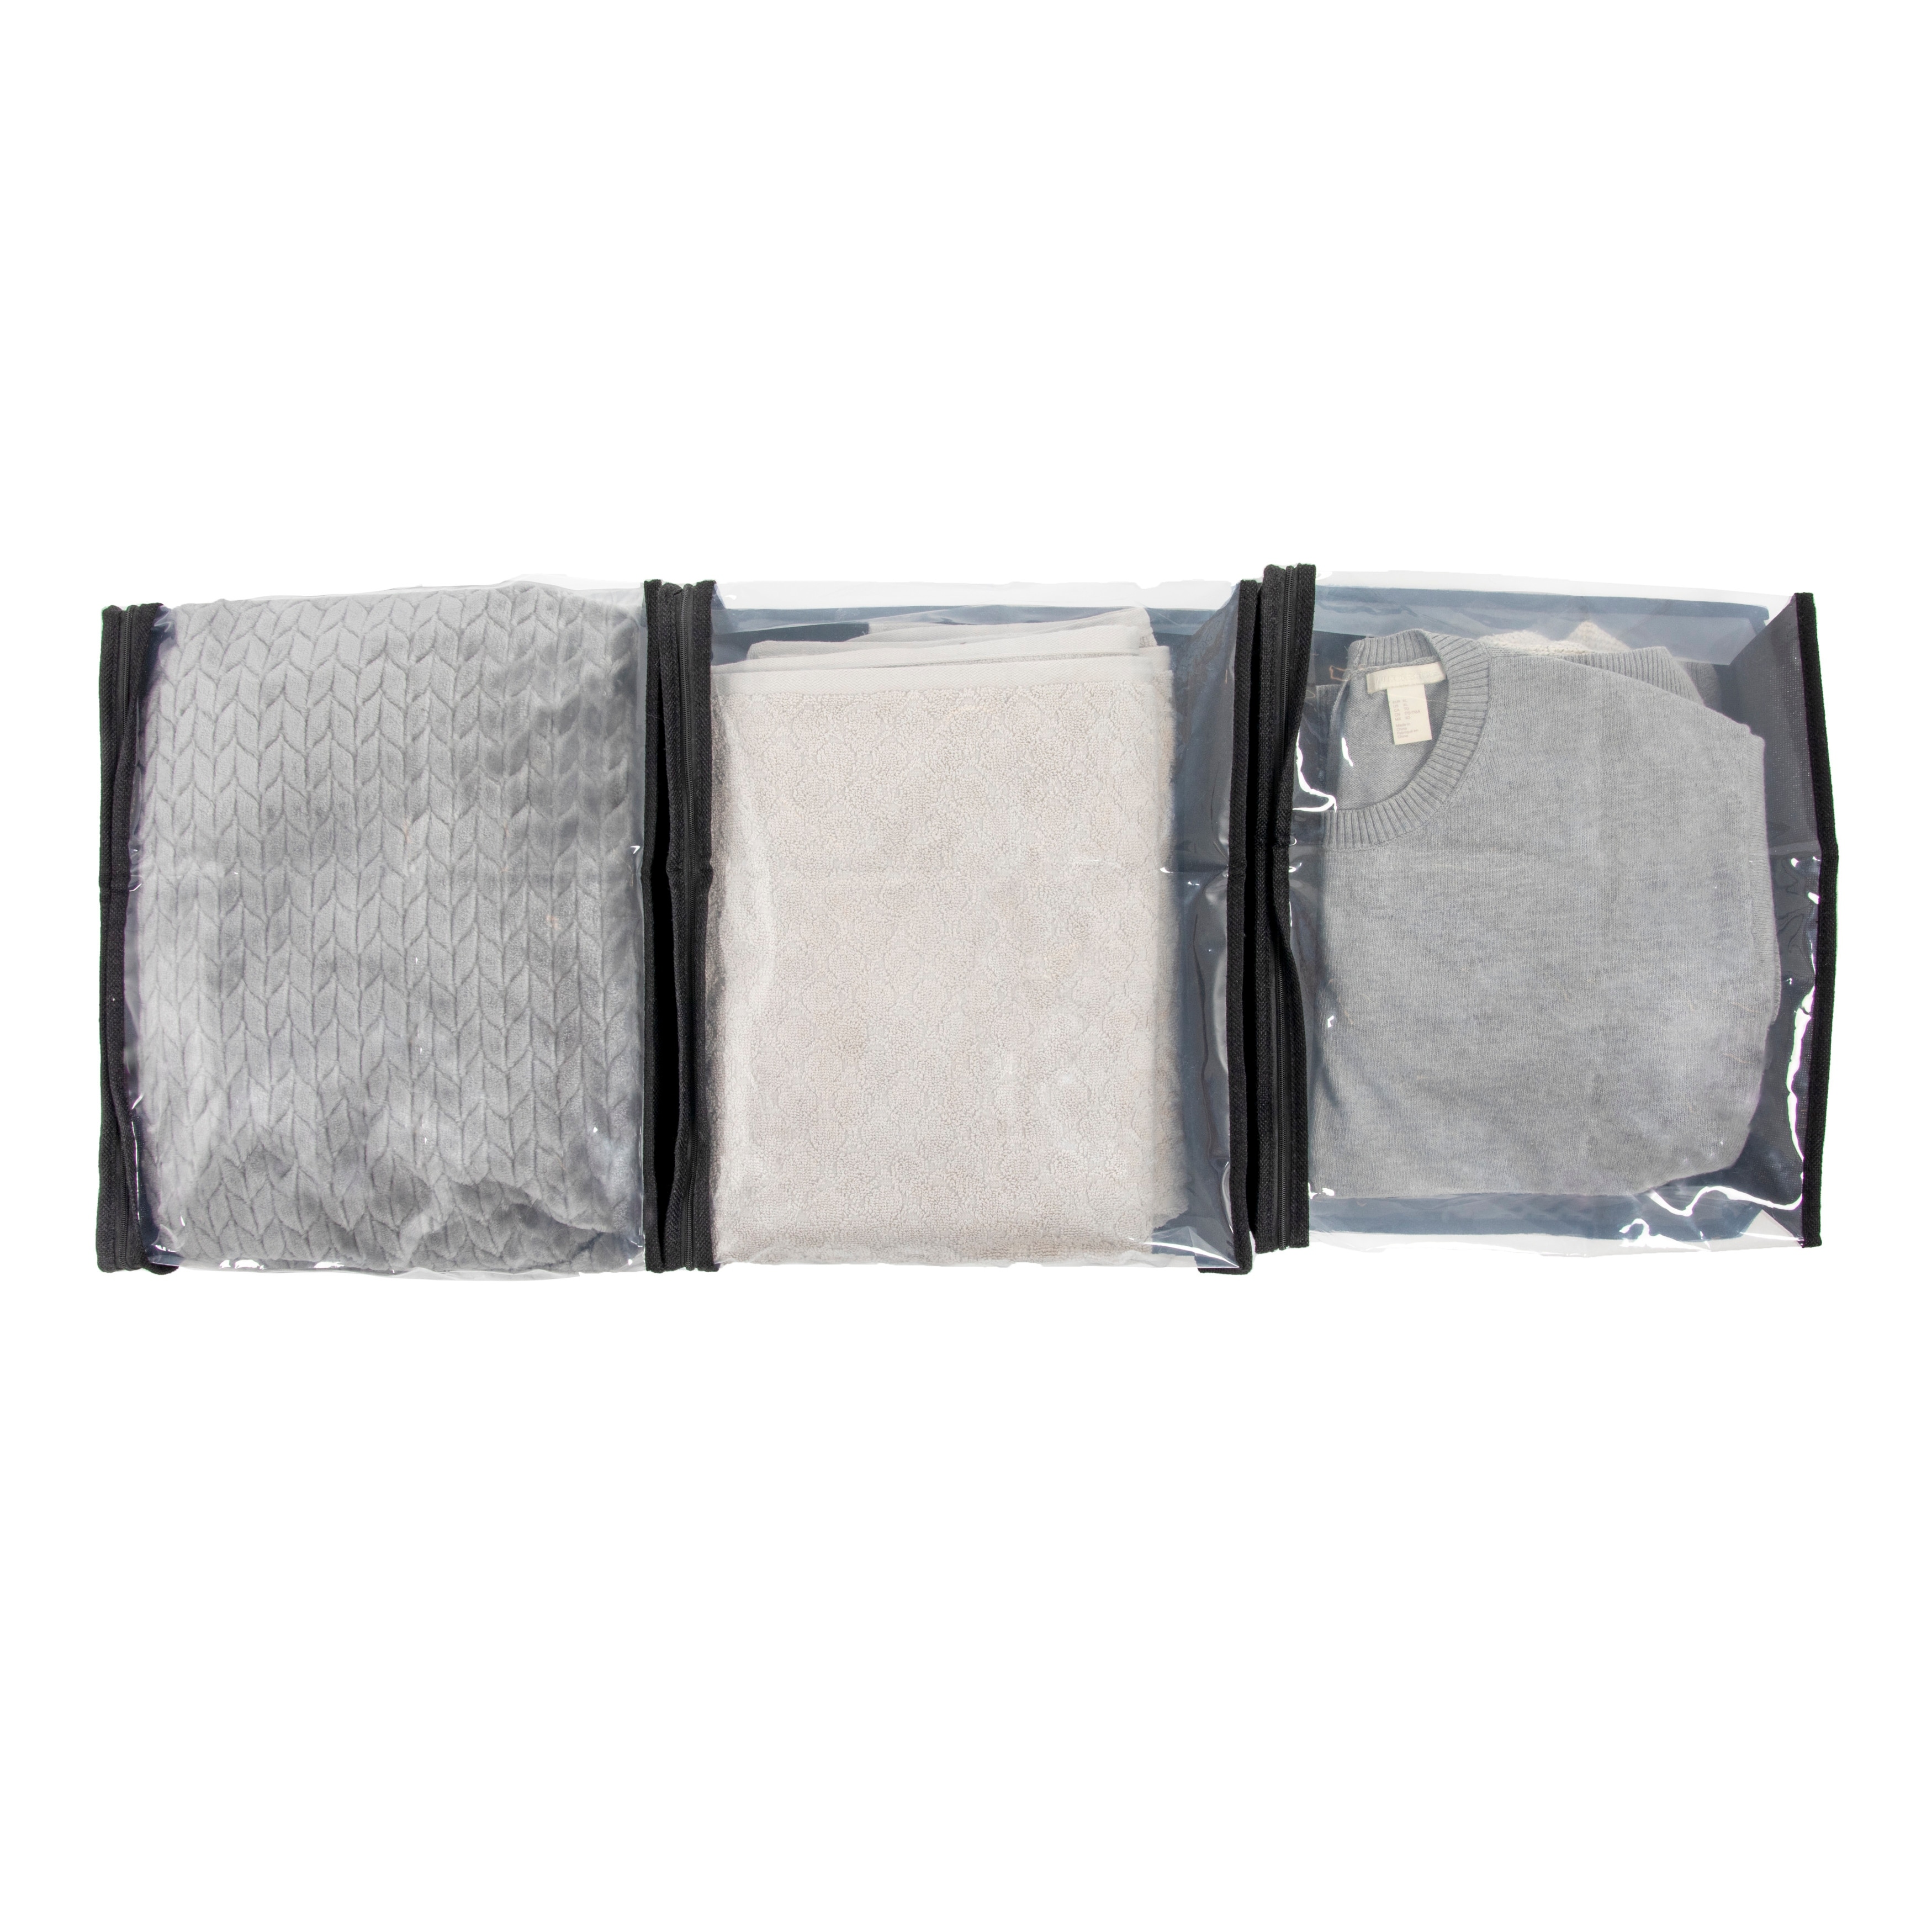 https://ak1.ostkcdn.com/images/products/is/images/direct/d6724b35704455ce4f87cd13548756f5e7c9ef35/Zippered-Sweater-Storage-Bags-with-Clear-Vision-Panel.jpg